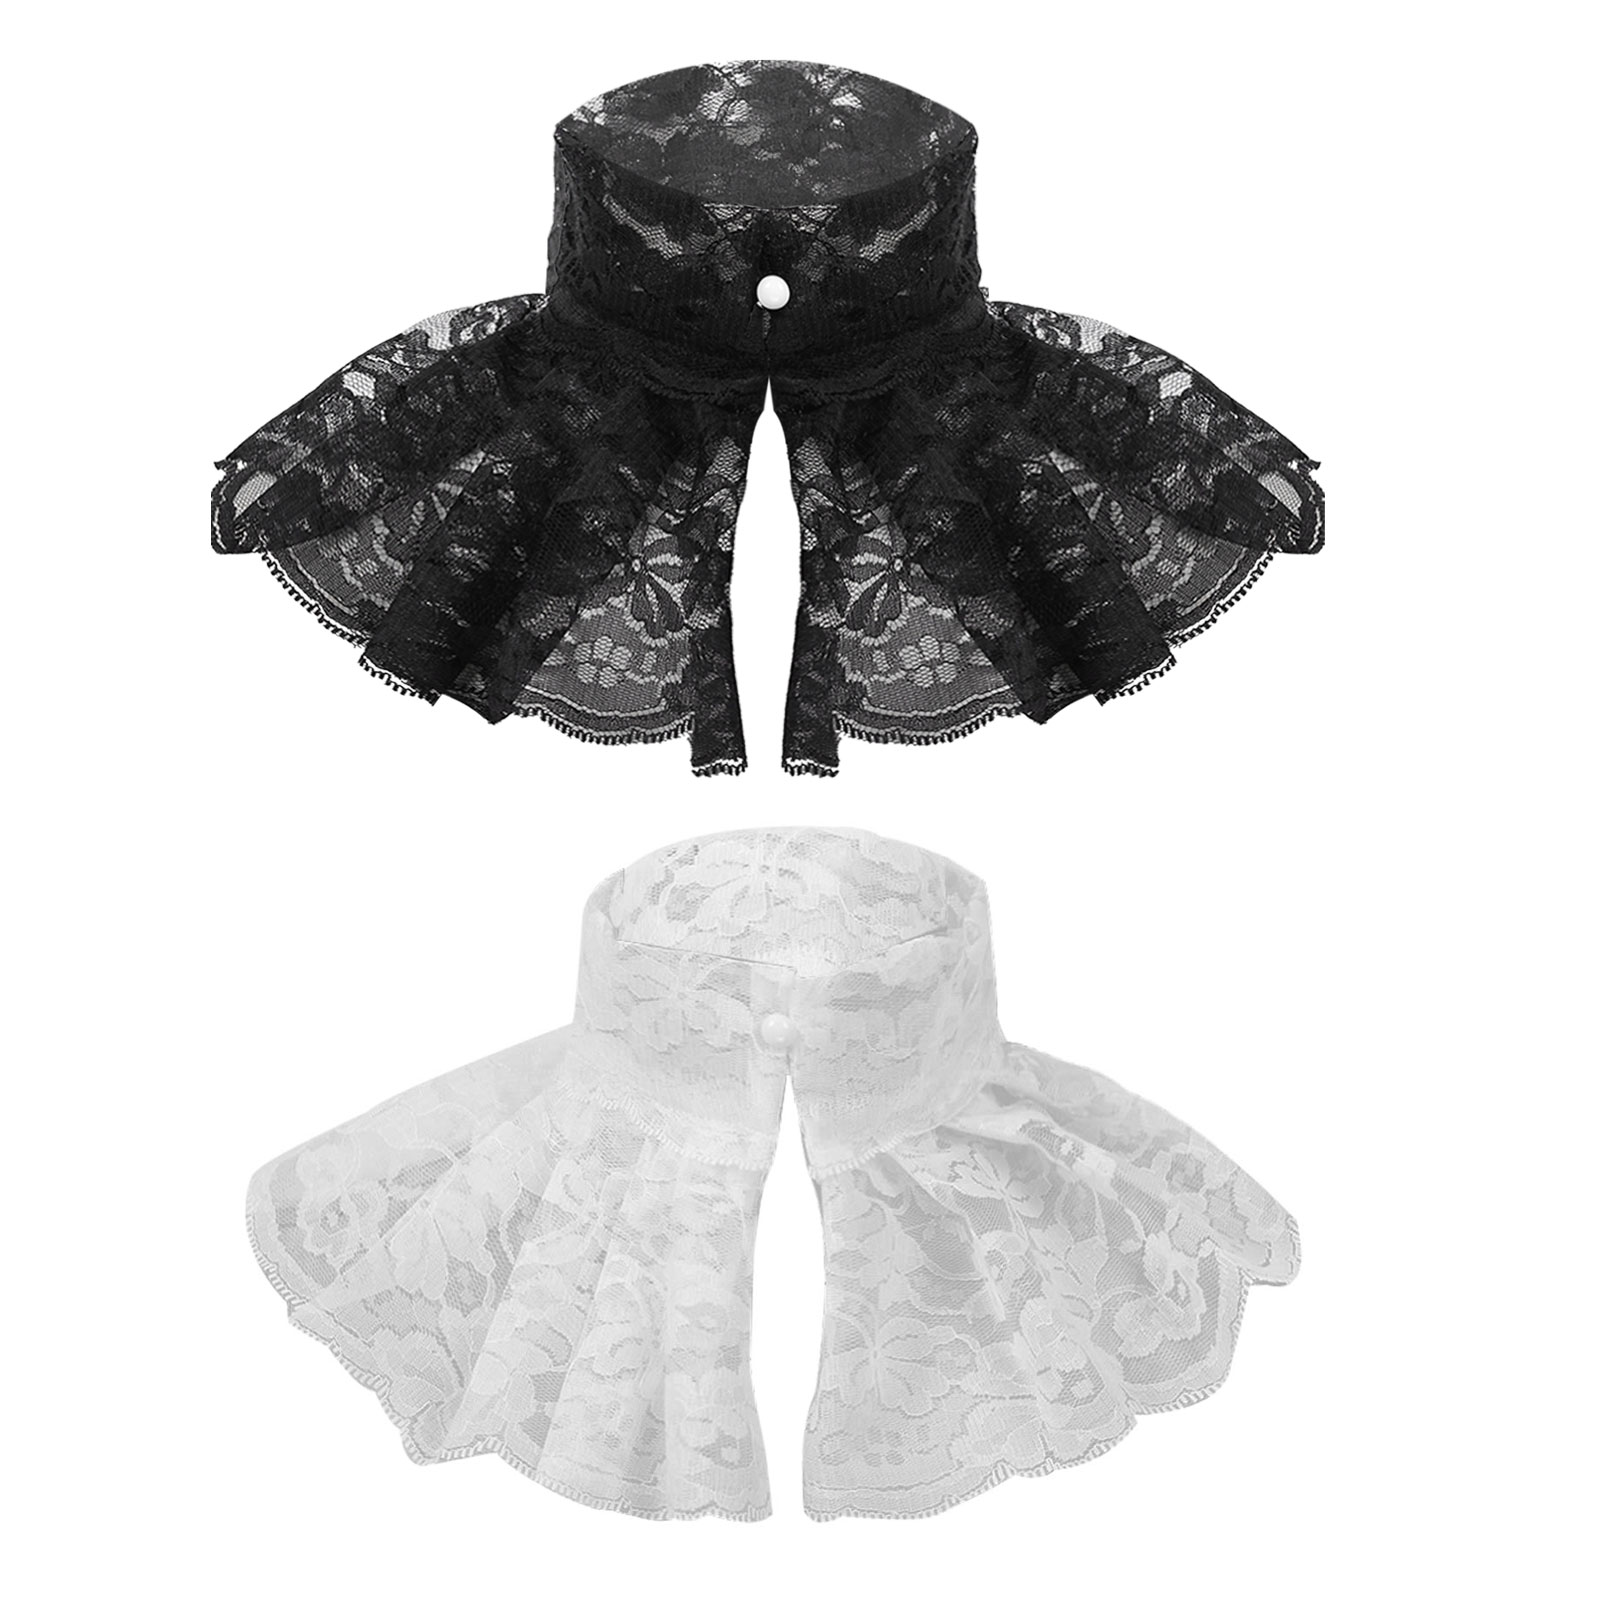 Women Sheer Lace Collar Victorian Renaissance Detachable Collar Ruffled Lace High Neck Collar Stage Party Shirt Dress Costume